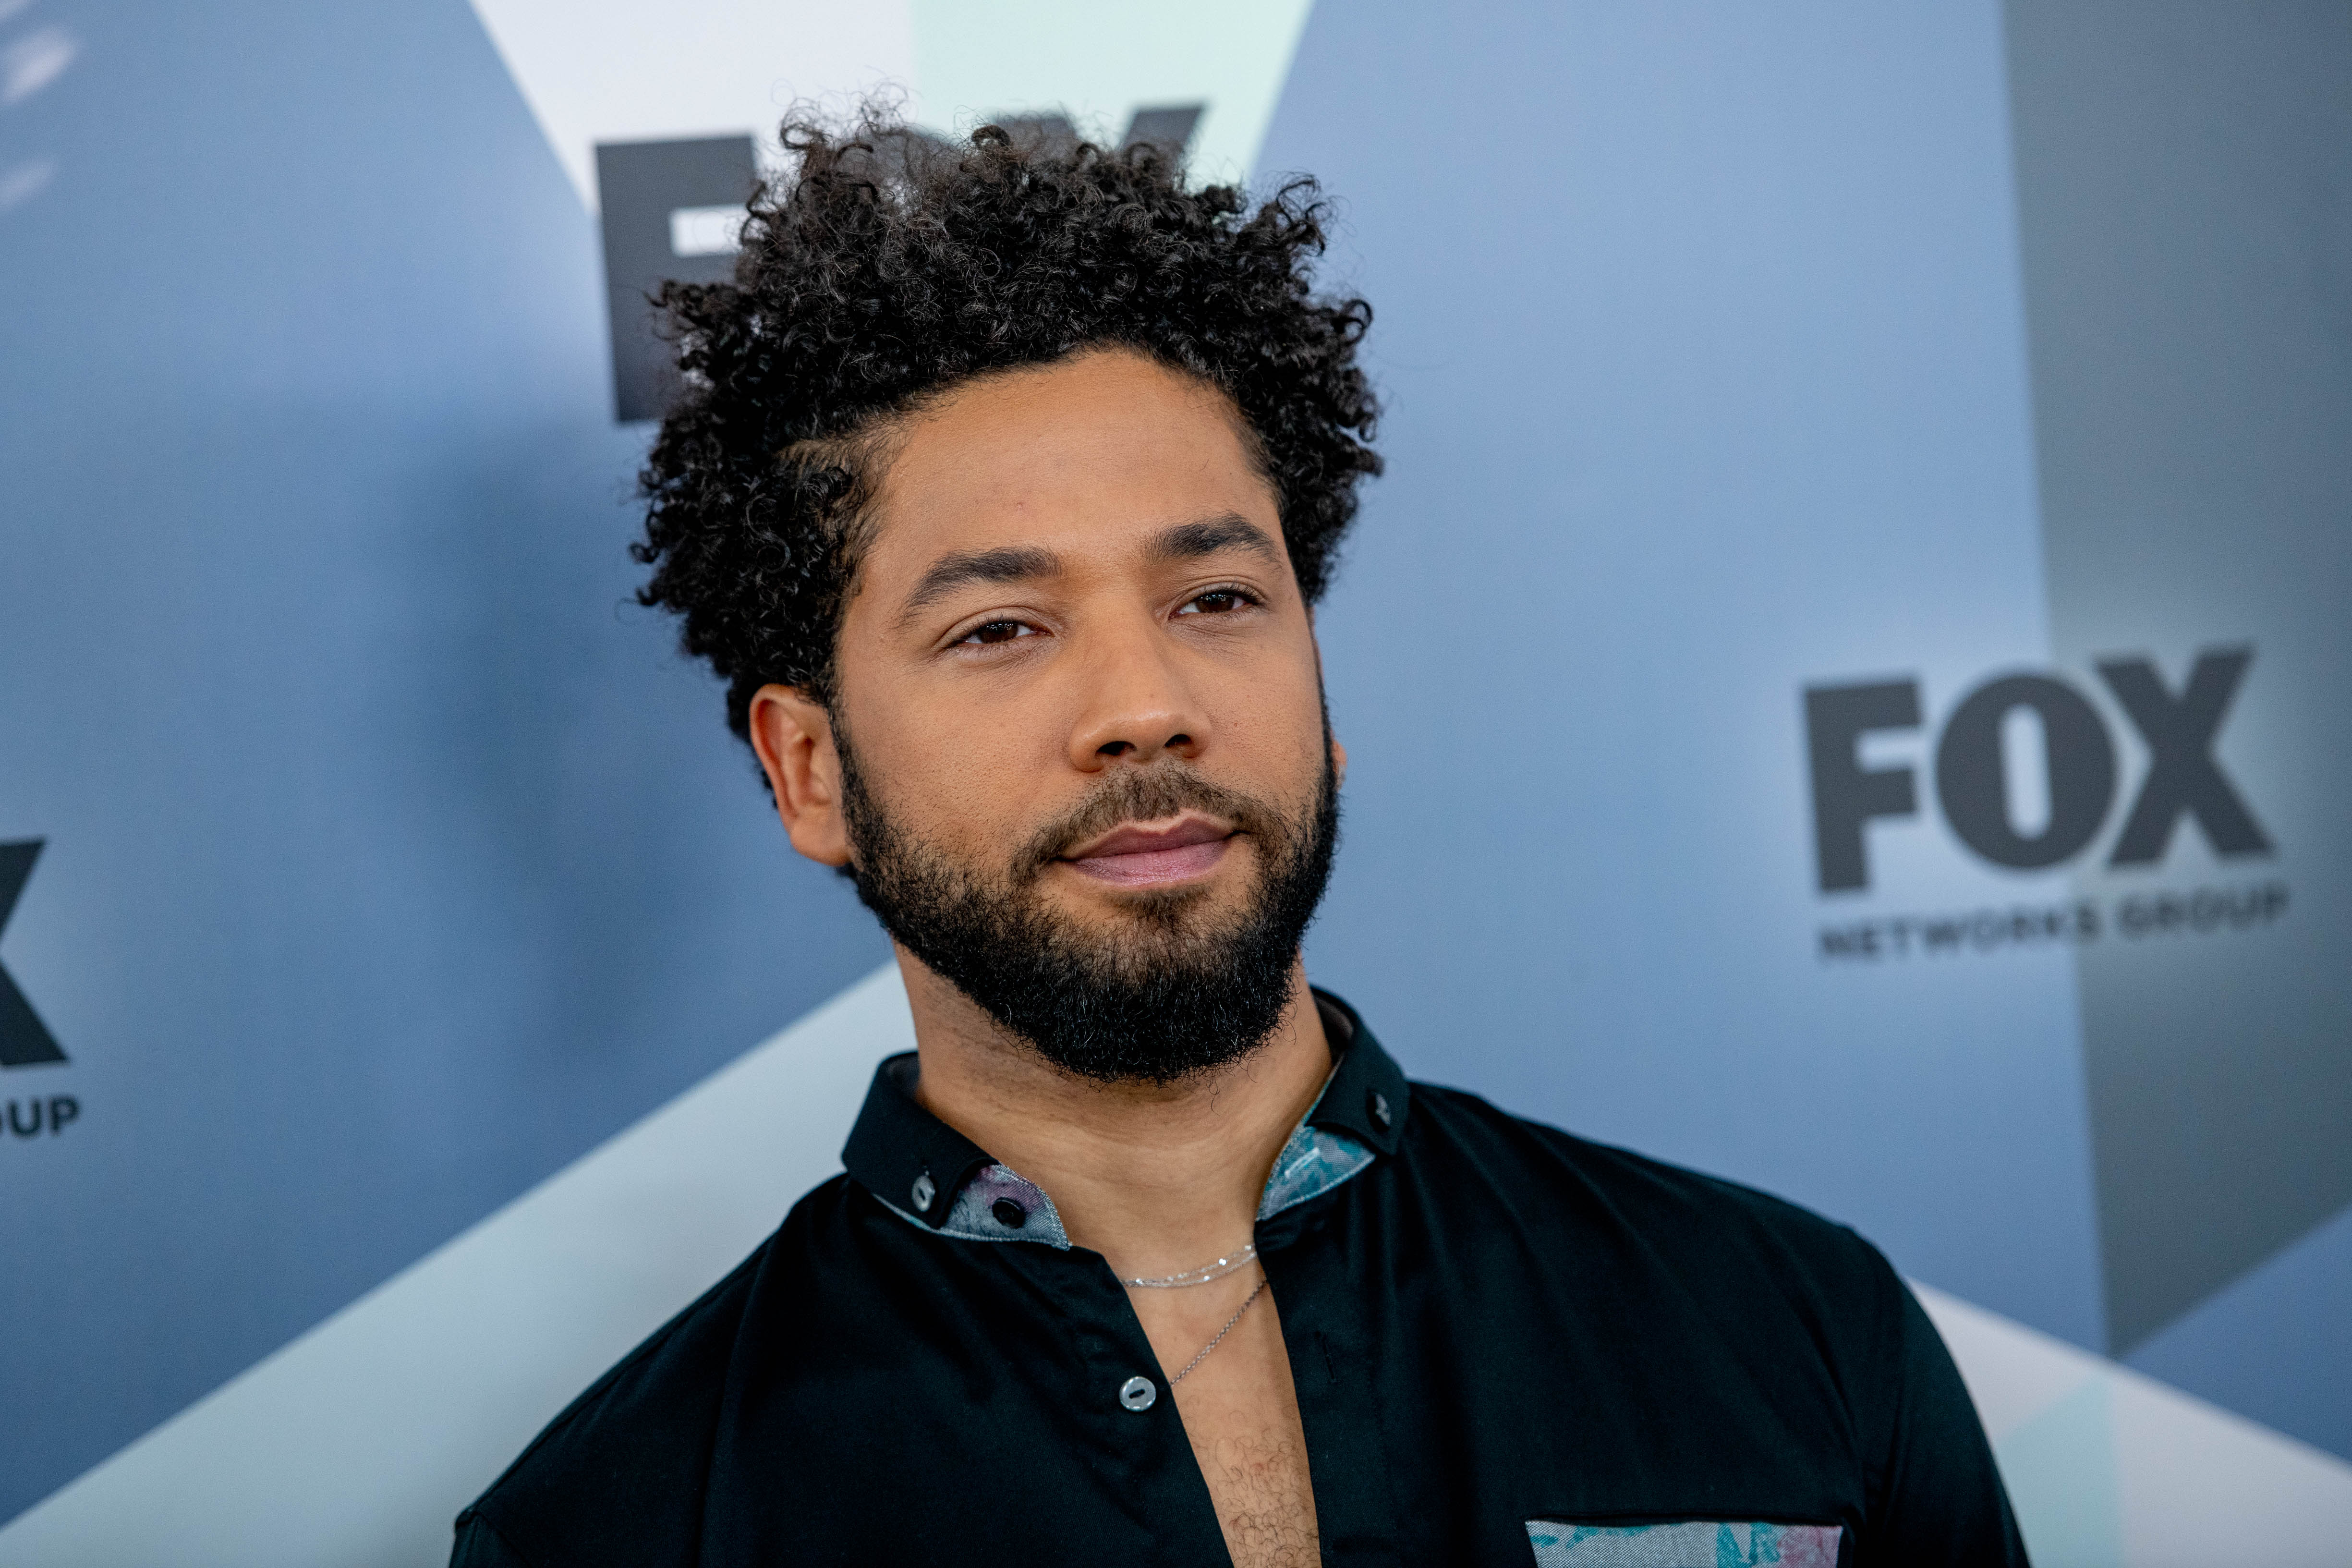 Jussie Smollett attends the 2018 Fox Network Upfront, May, 2018. | Photo: GettyImages